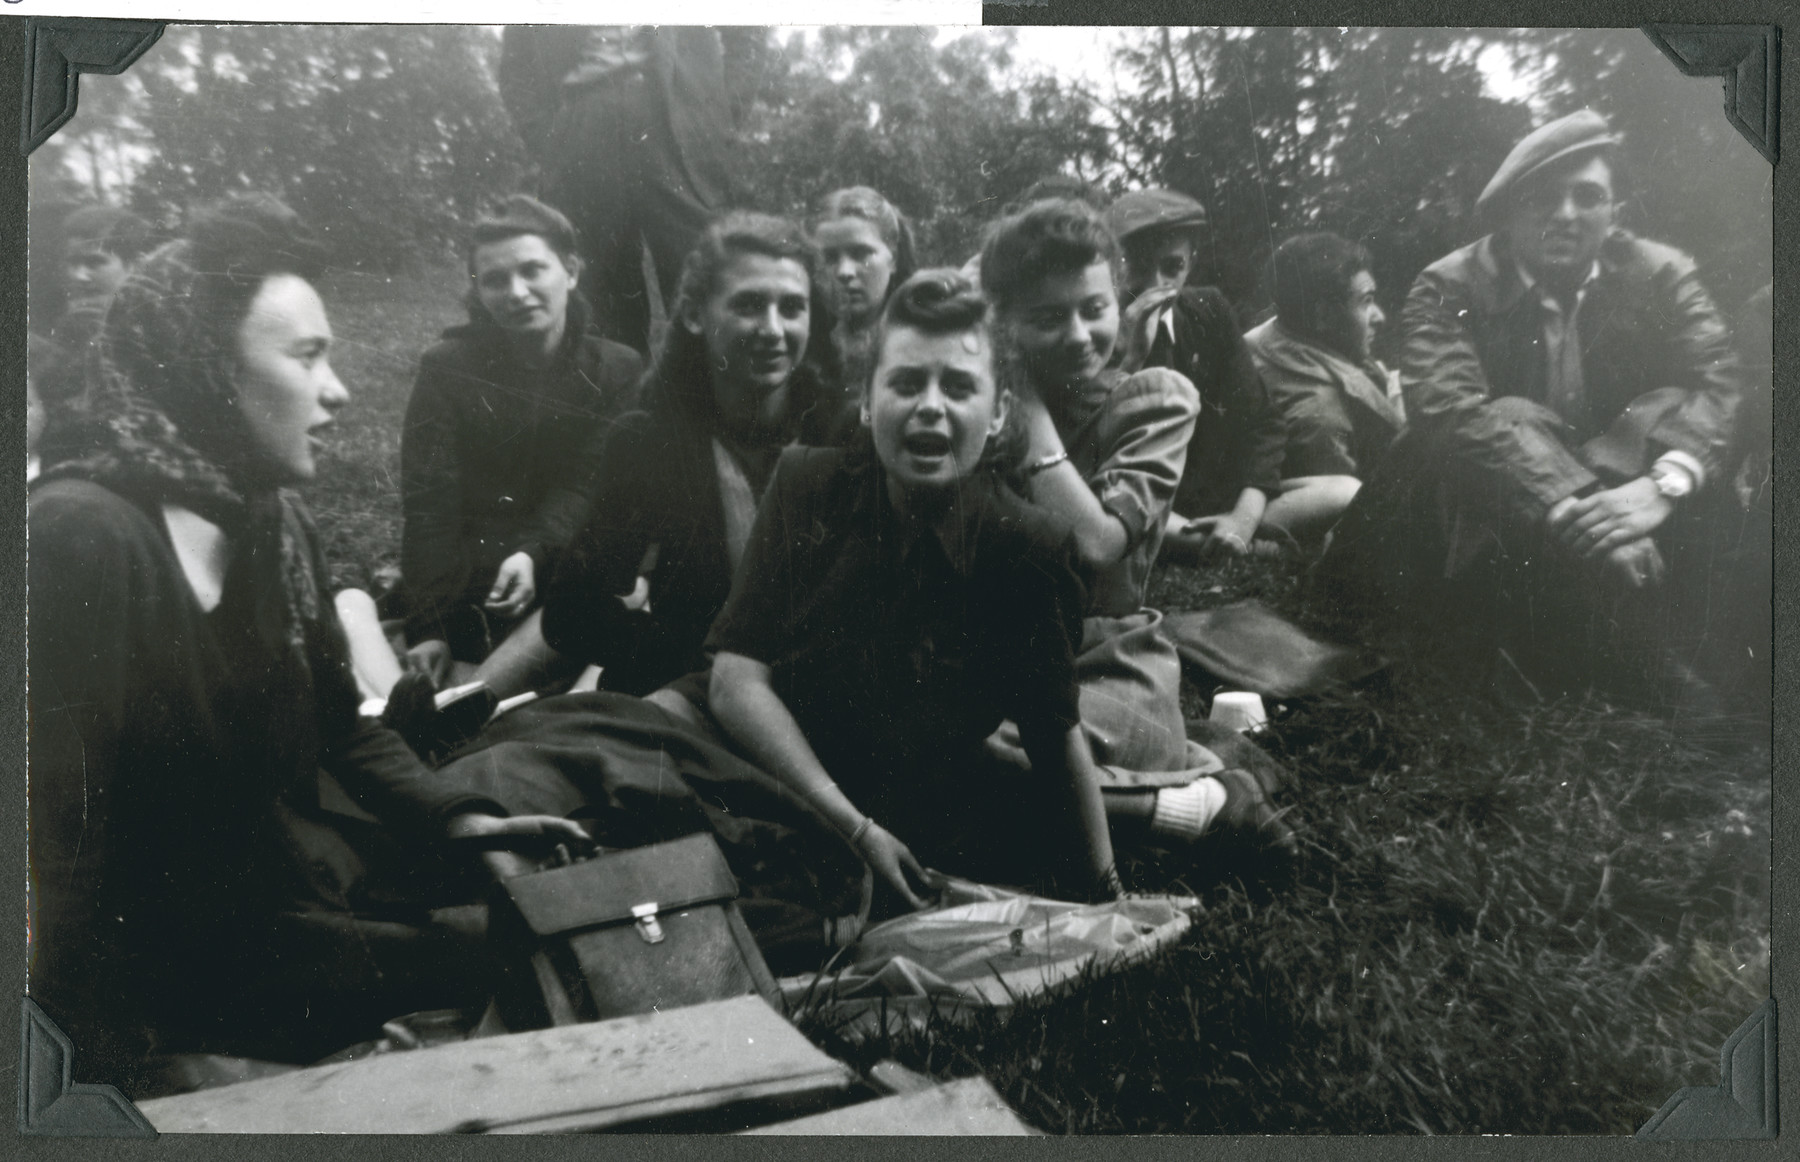 Teenage girls [probably from the Lindenfels children's home] enjoy an outing to Koenigstein Castle.

The original caption reads: "Picnic: Koenigstein Castle.  Songs and smiles brighten up the faces of the happy children."